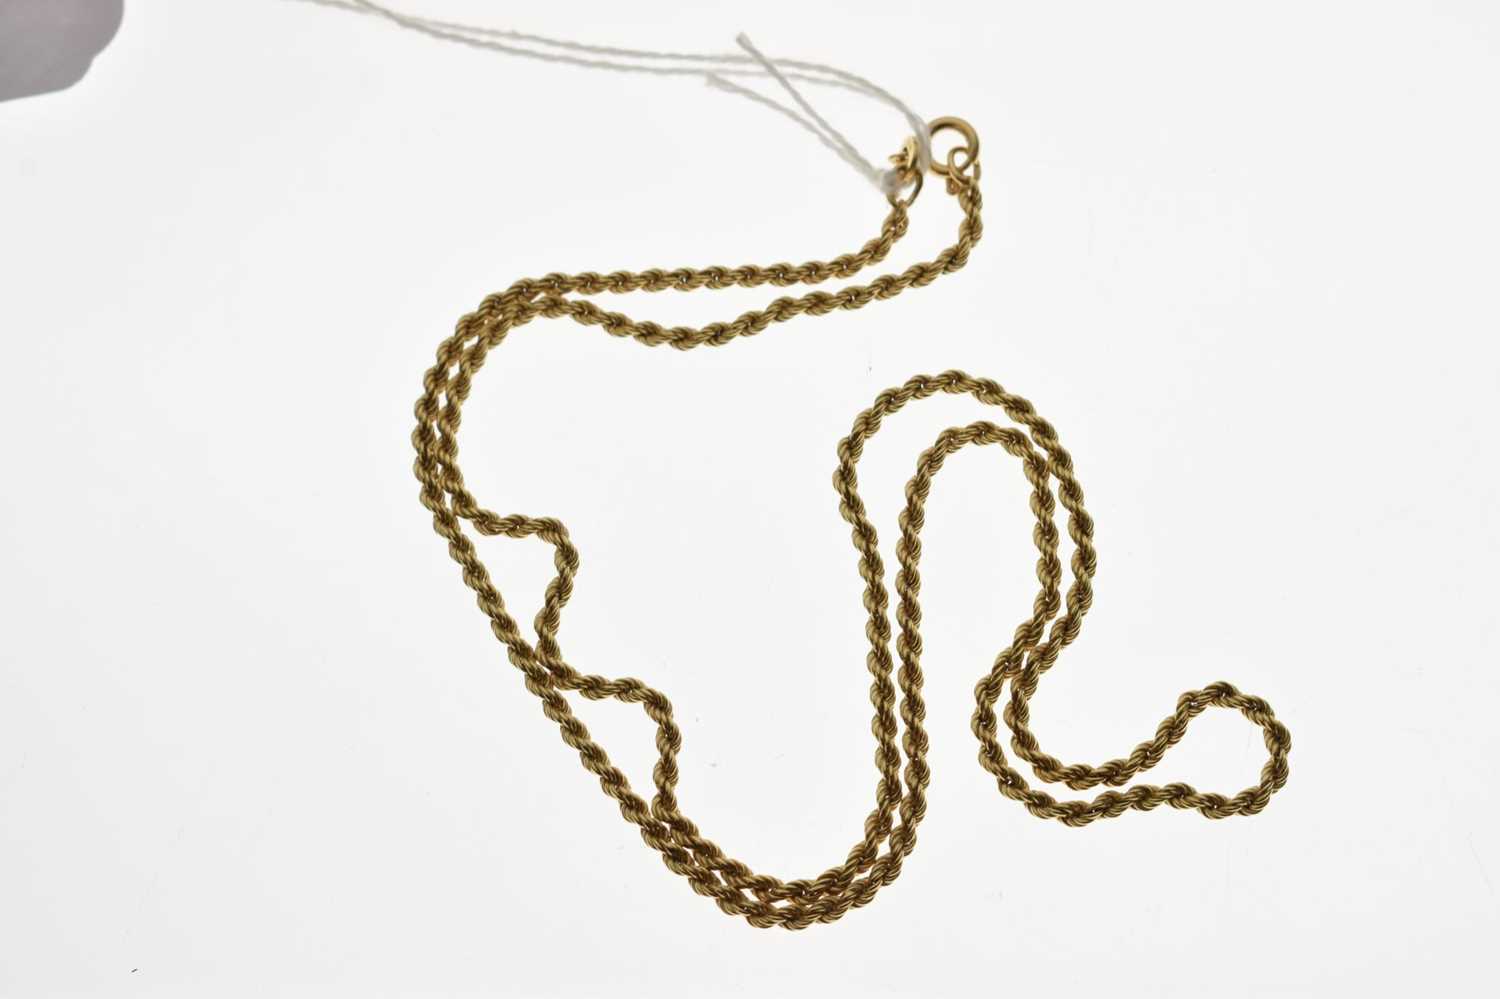 18ct gold rope link necklace - Image 2 of 5